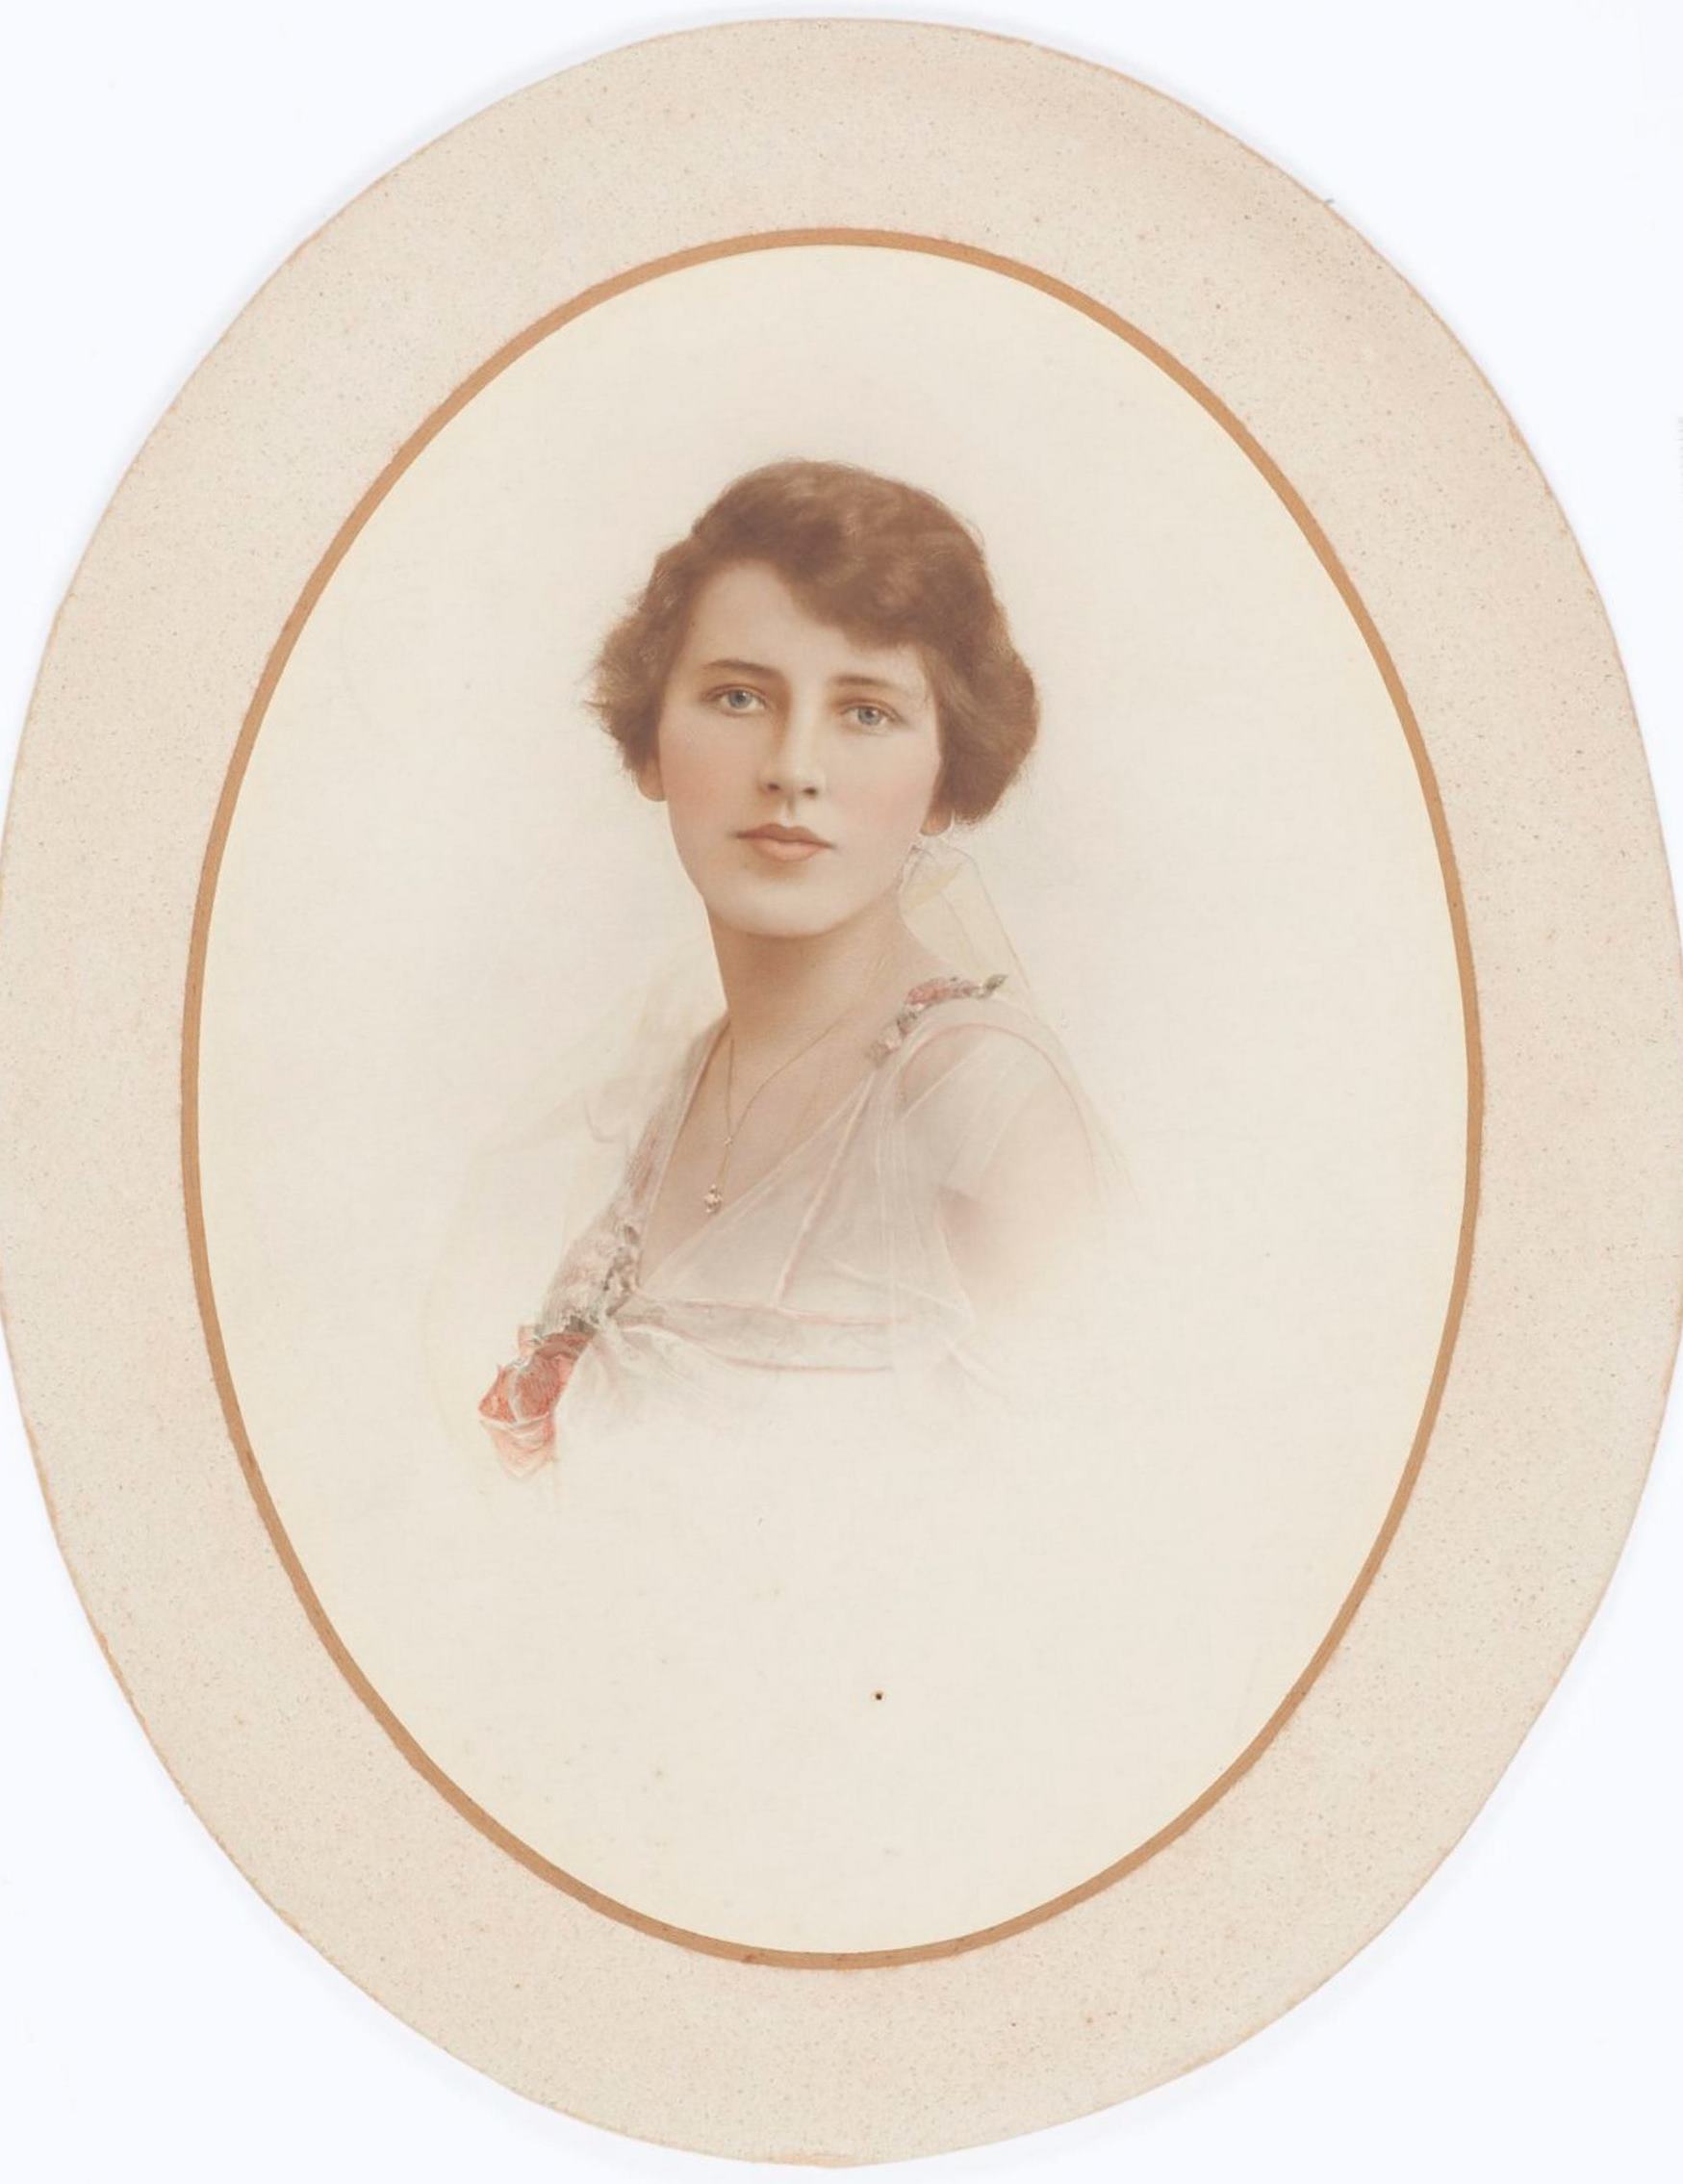 Studio portrait of Dora Walford, neeAlexander, around the time of her marriage to Leslie Walford in March 1917 / photographer unknown